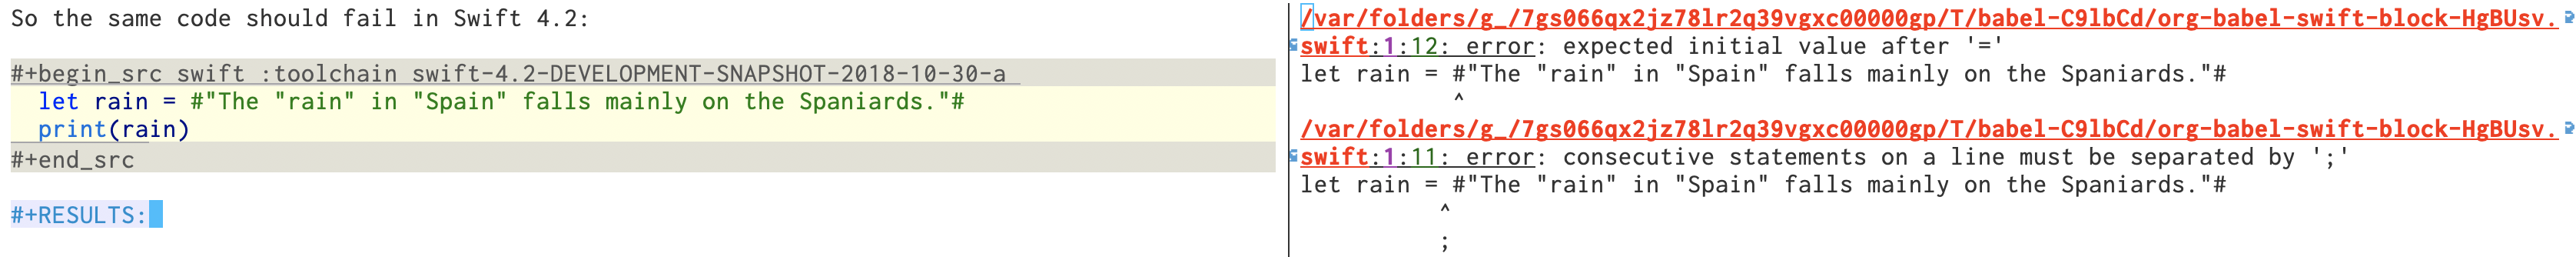 examples/SwiftError.png